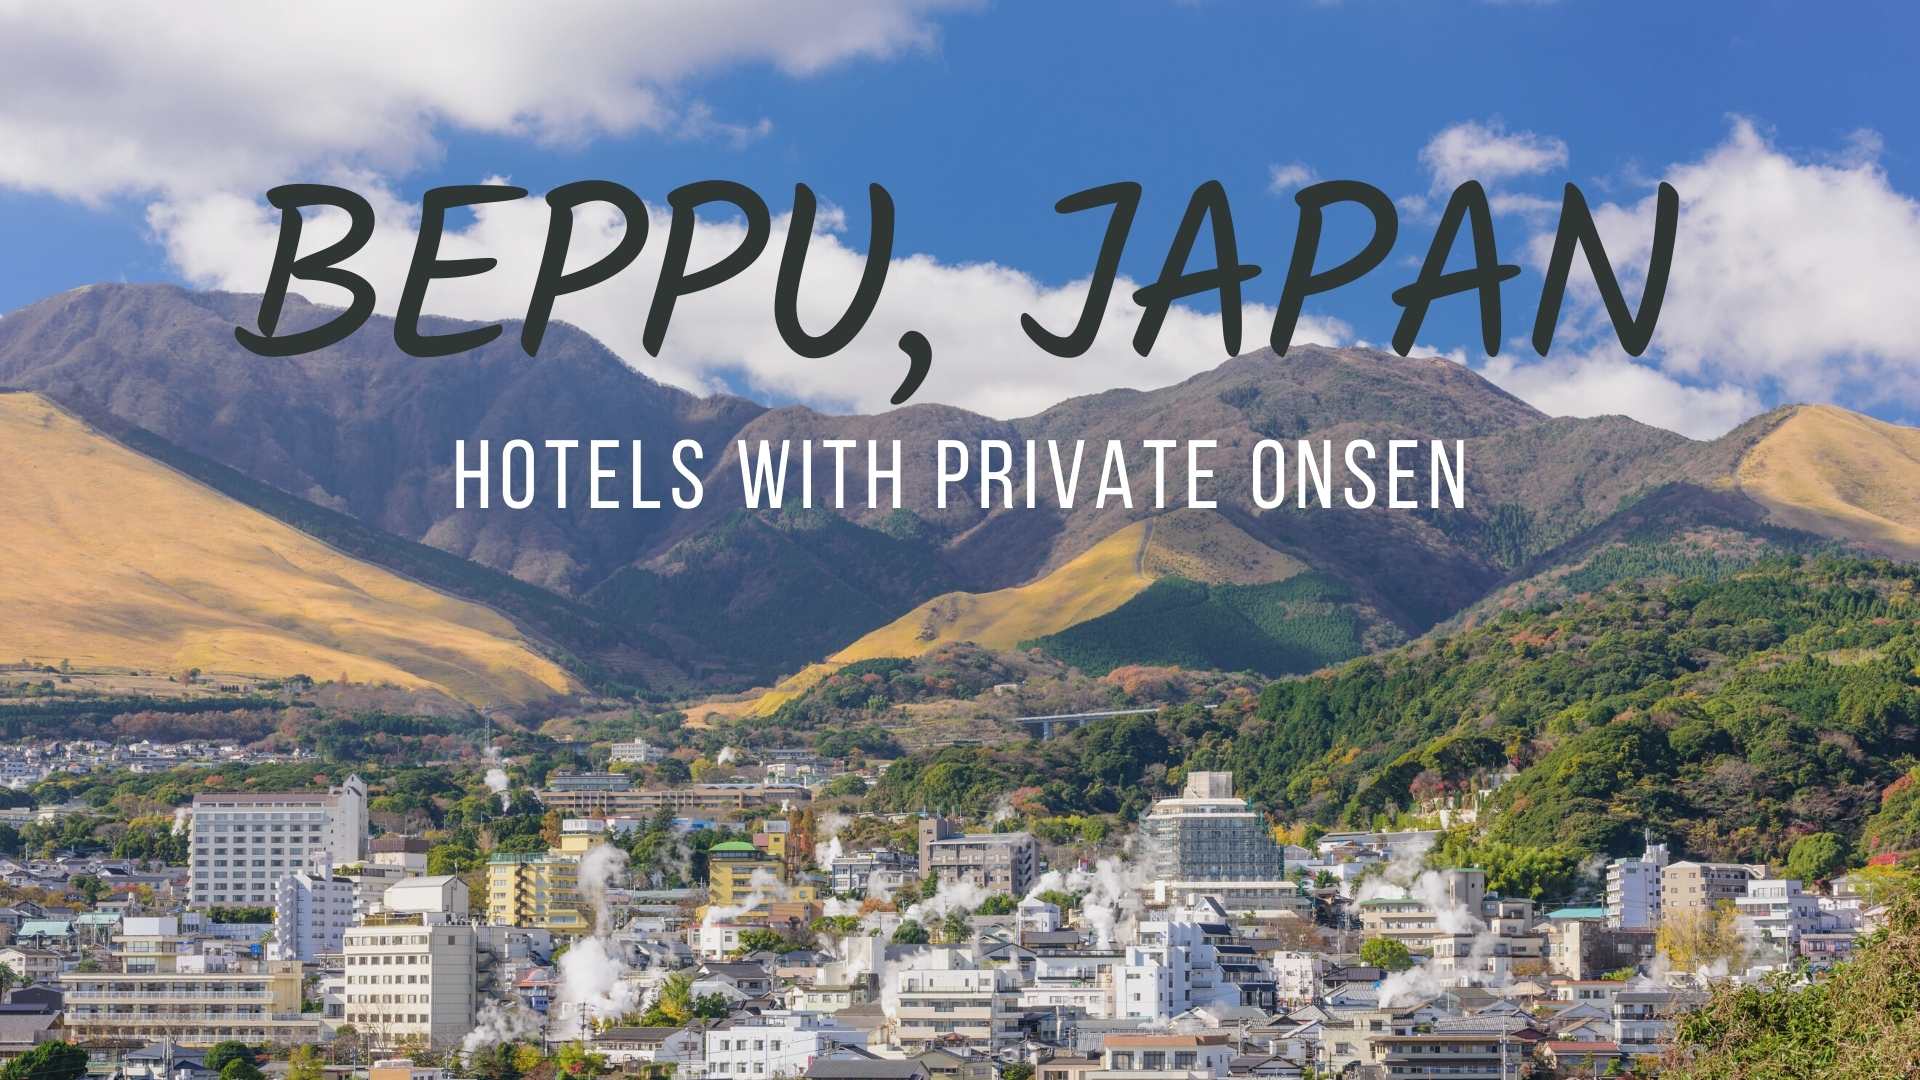 Beppu hotels with private onsen, Beppu ryokan with private onsen, Private Japanese hot springs in Beppu, Kyushu, where to stay in Beppu Japan, Onsen hot springs in Japan cover